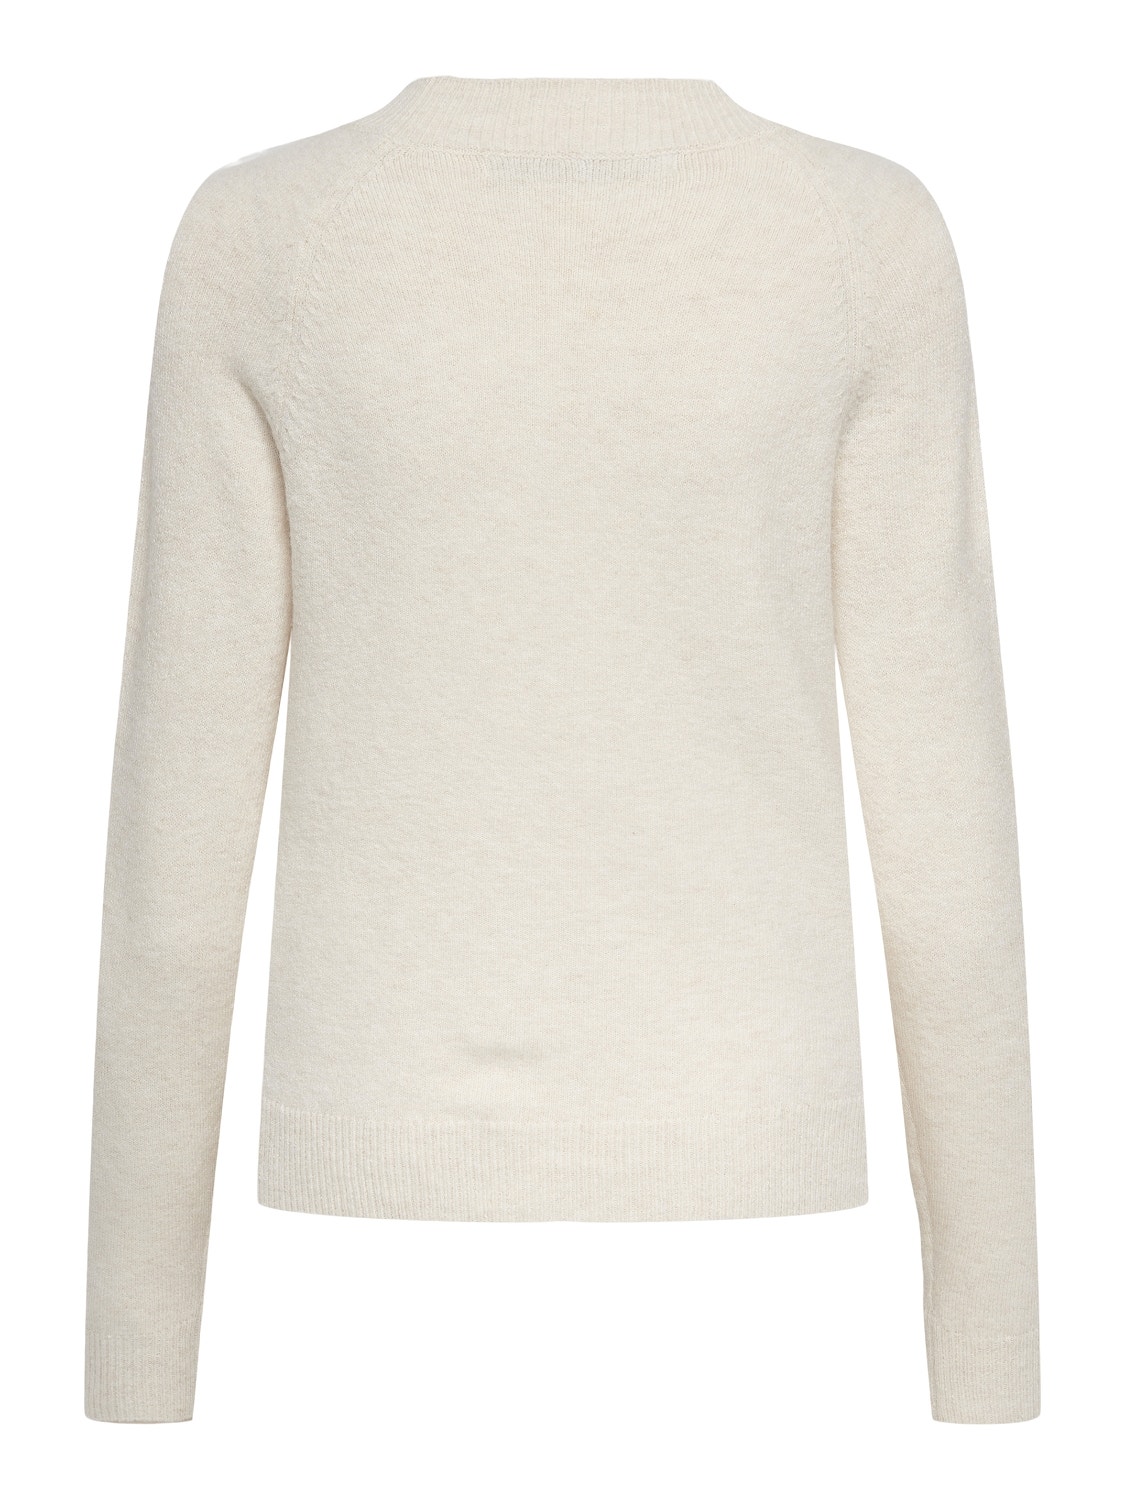 ONLY o-neck knitted pullover -Birch - 15204279